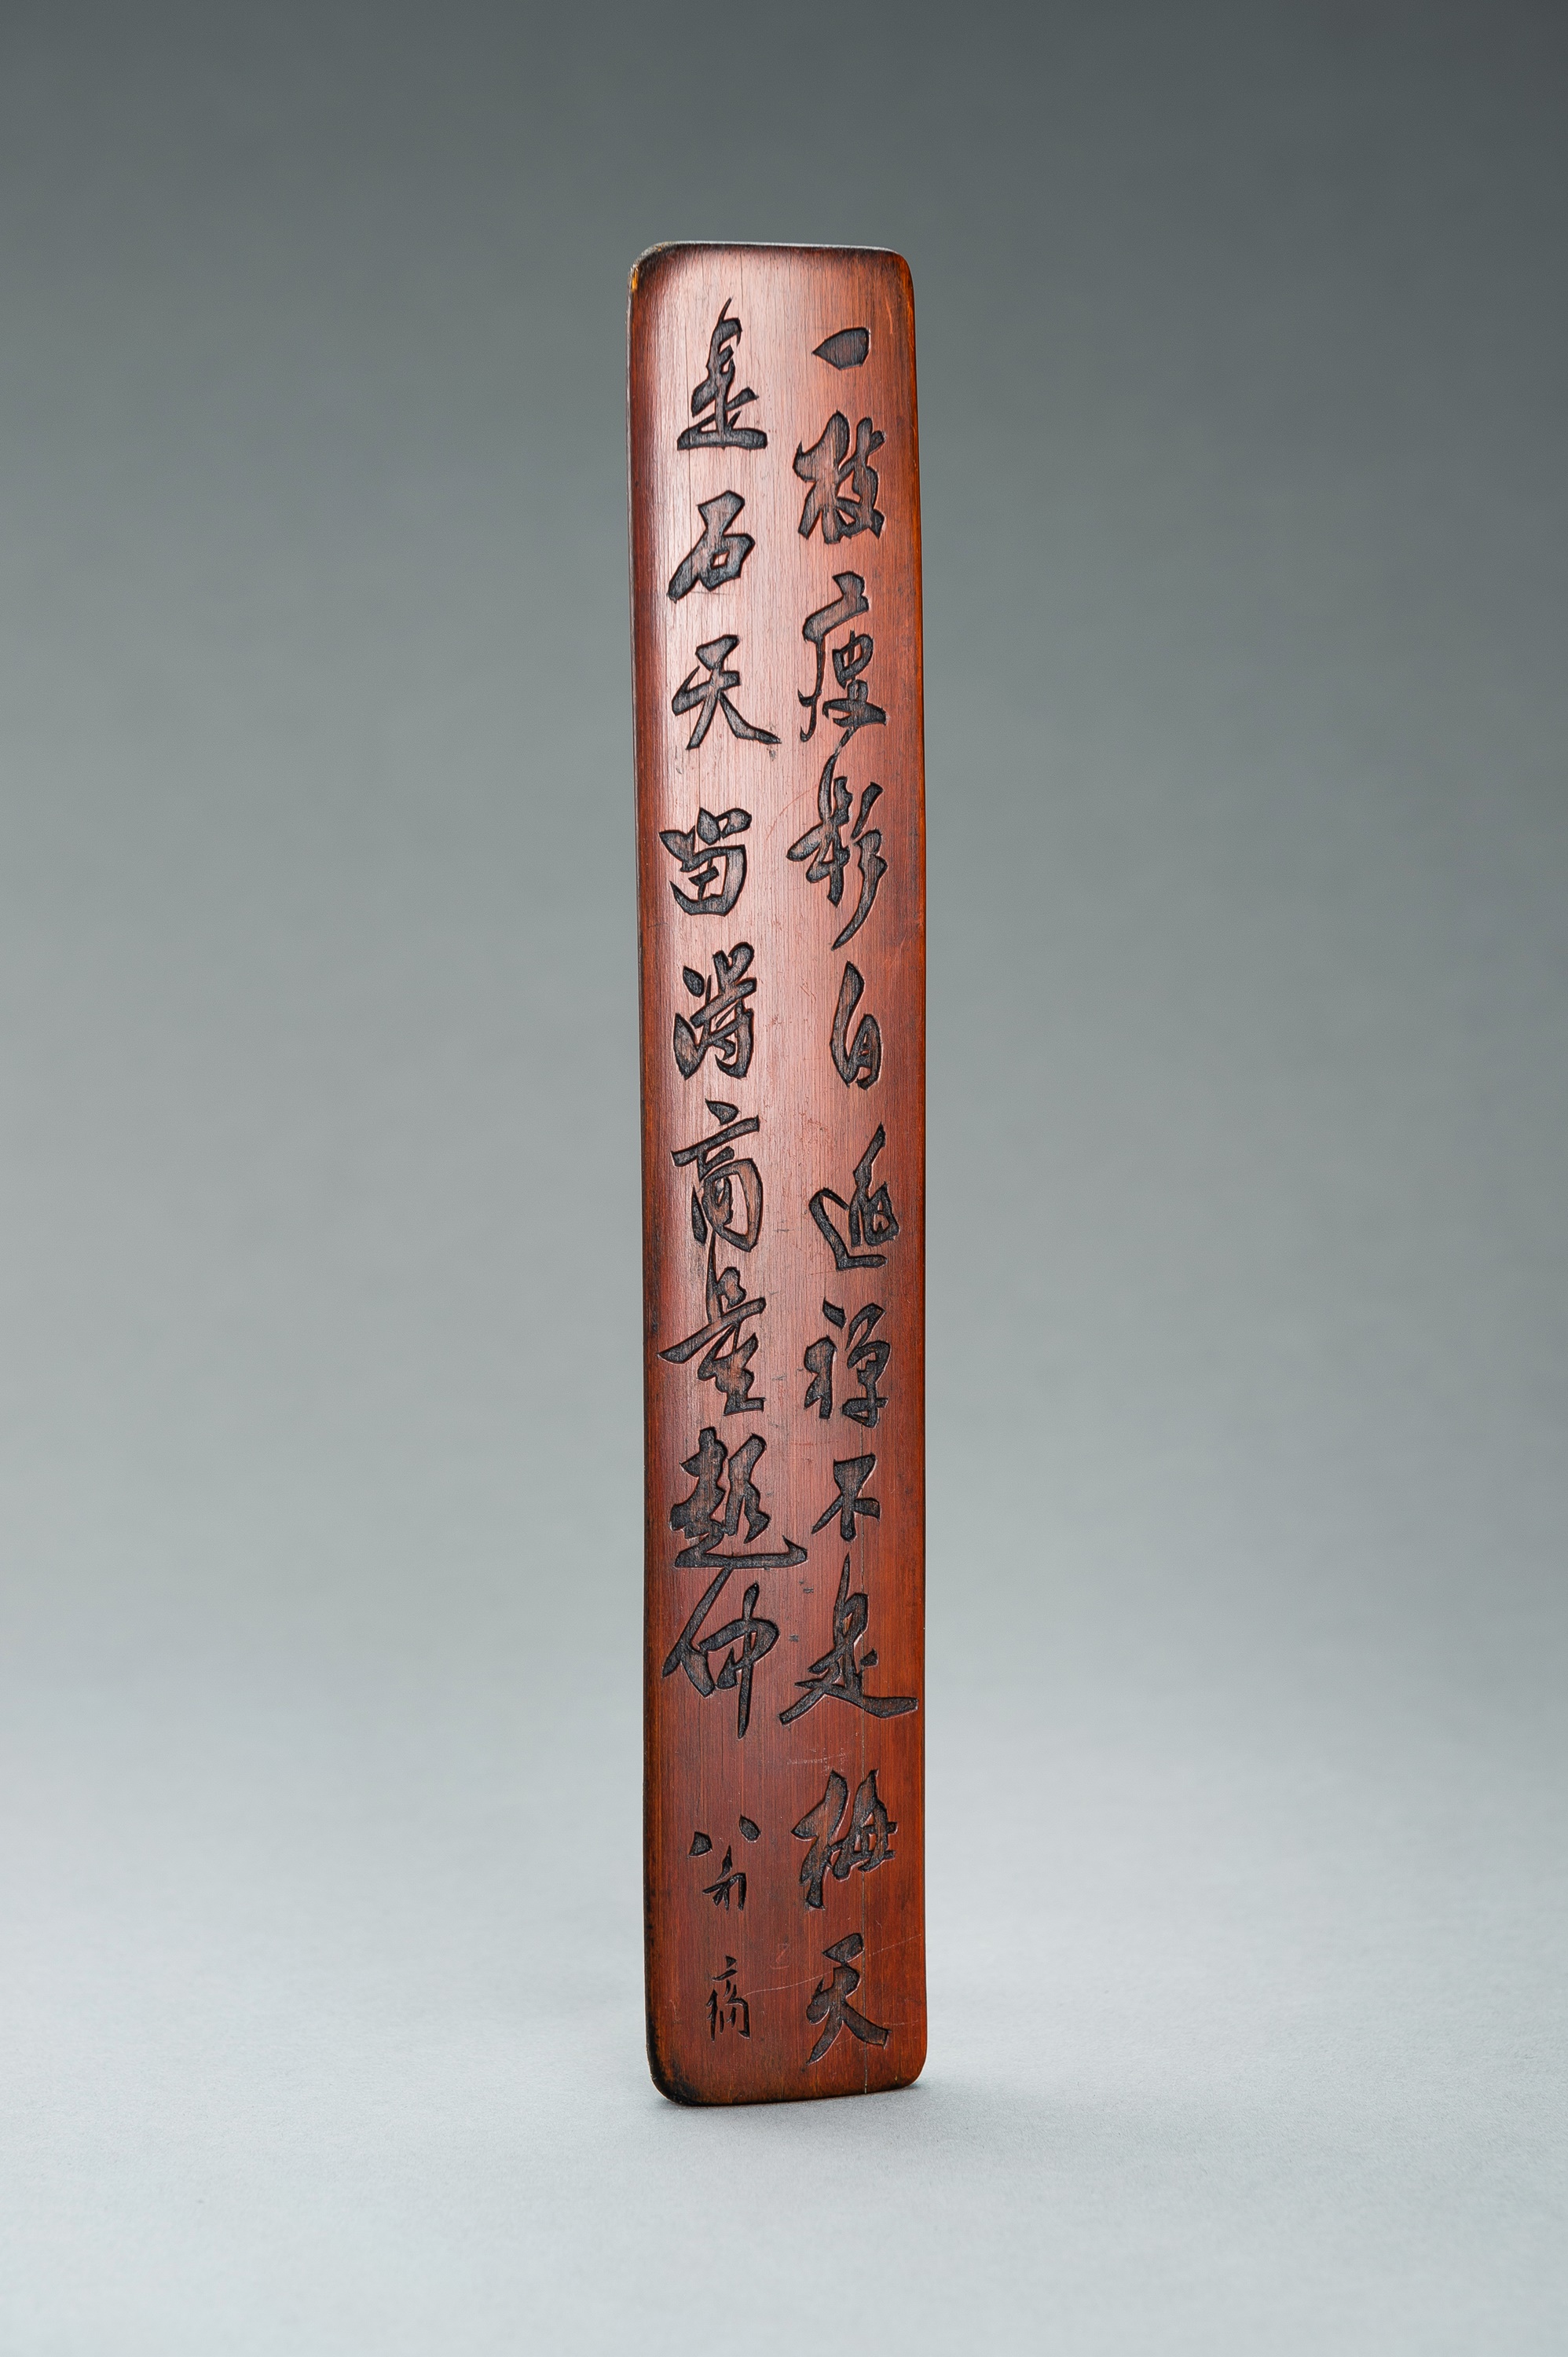 A BAMBOO WRIST REST WITH CALIGRAPHY - Image 6 of 9